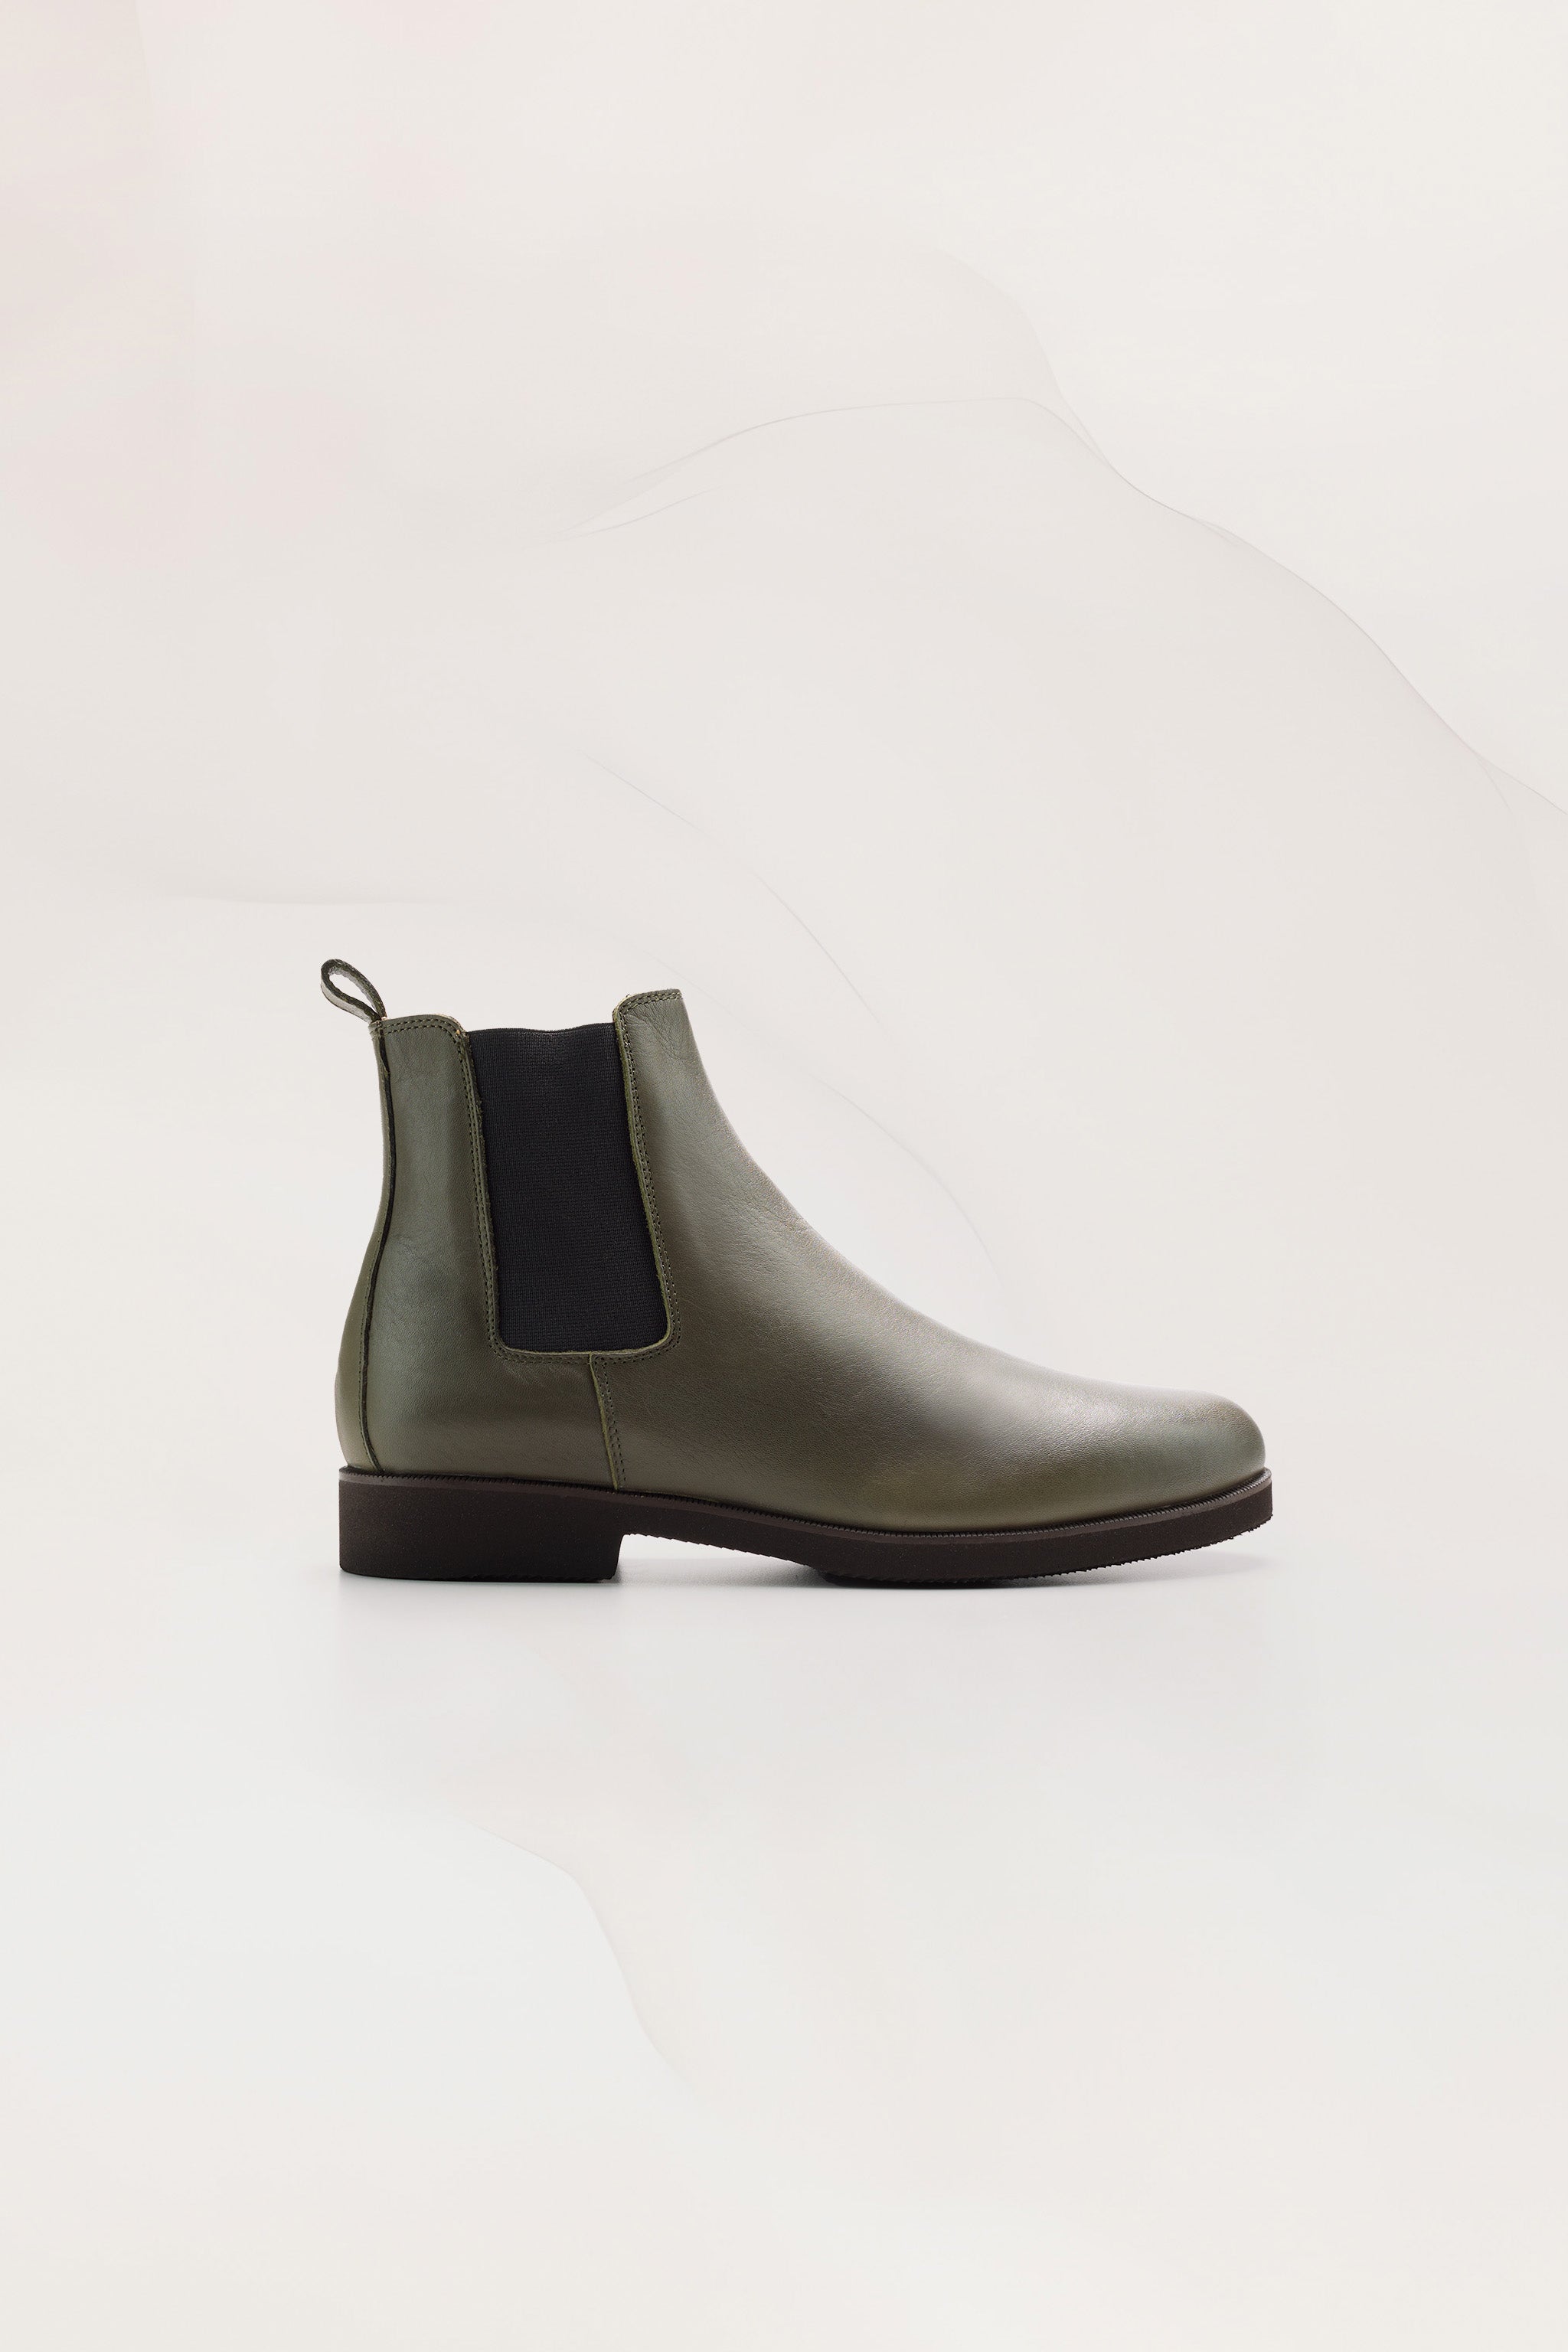 Womens Chelsea Boots in Military Green Calf